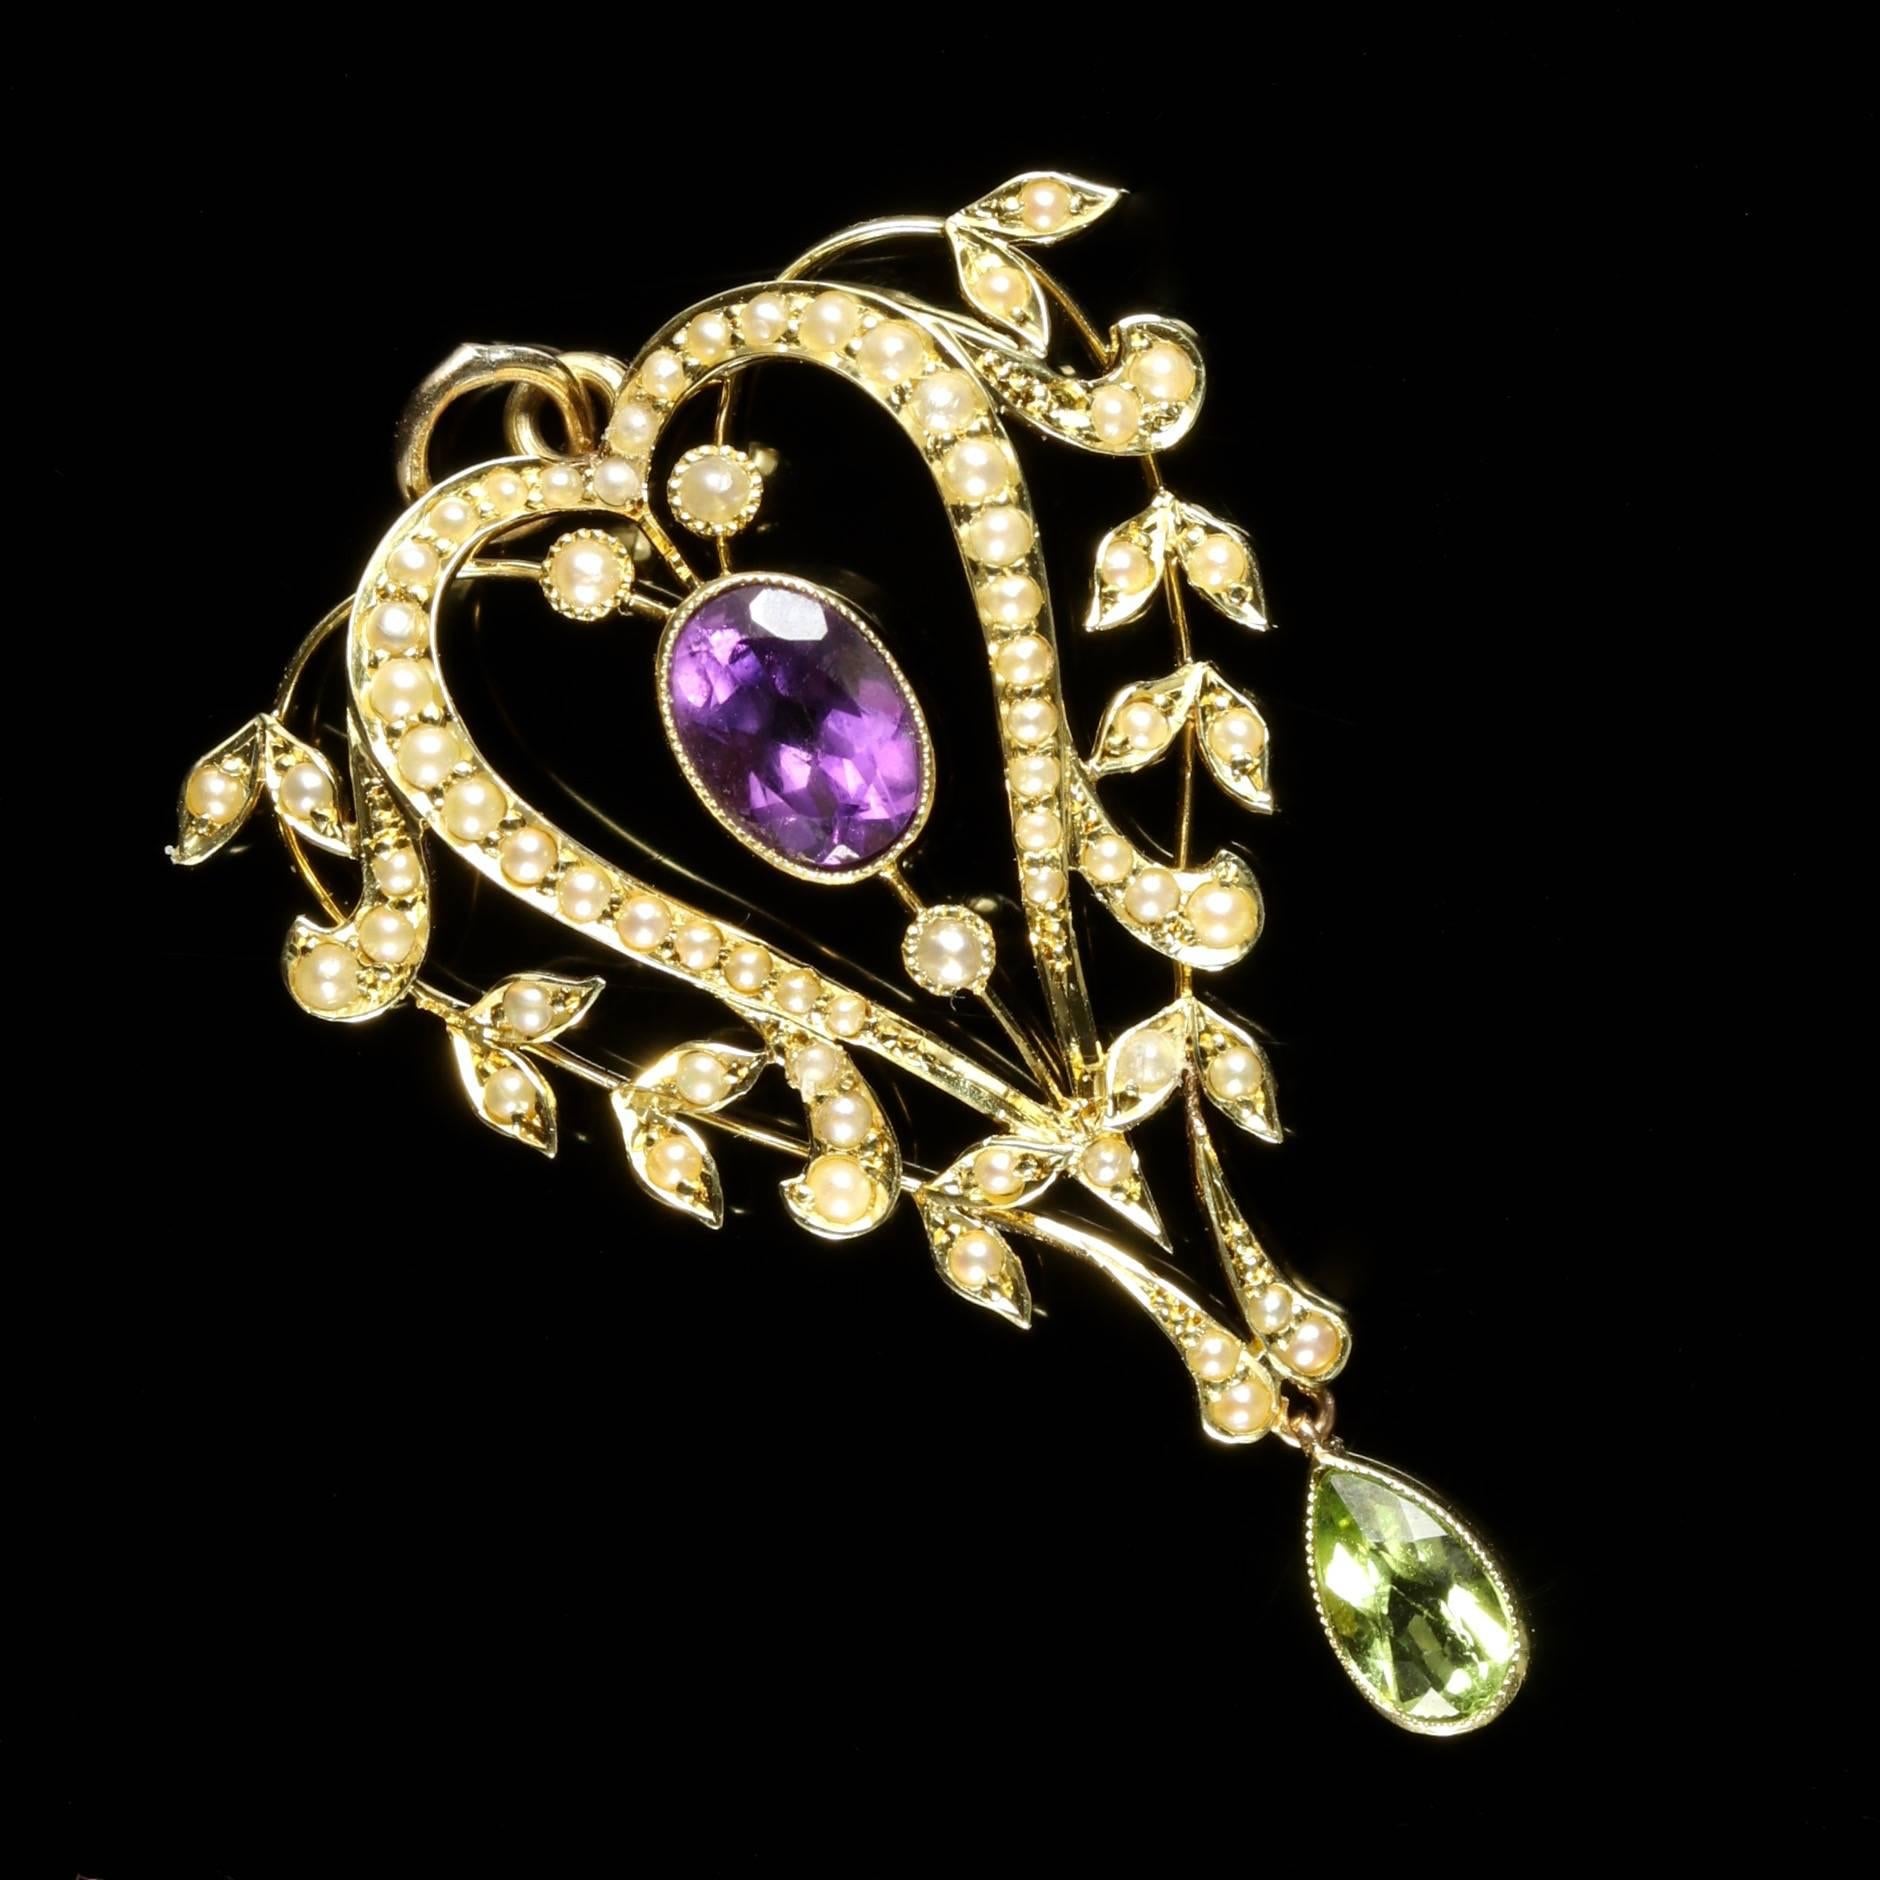 This beautiful 15ct Yellow Gold Victorian Suffragette heart pendant is adorned with a Amethyst in the centre which is surrounded by Pearls, finishing with a green Peridot dropper.

The pendant is decorated in lovely Pearls, and boasts a violet